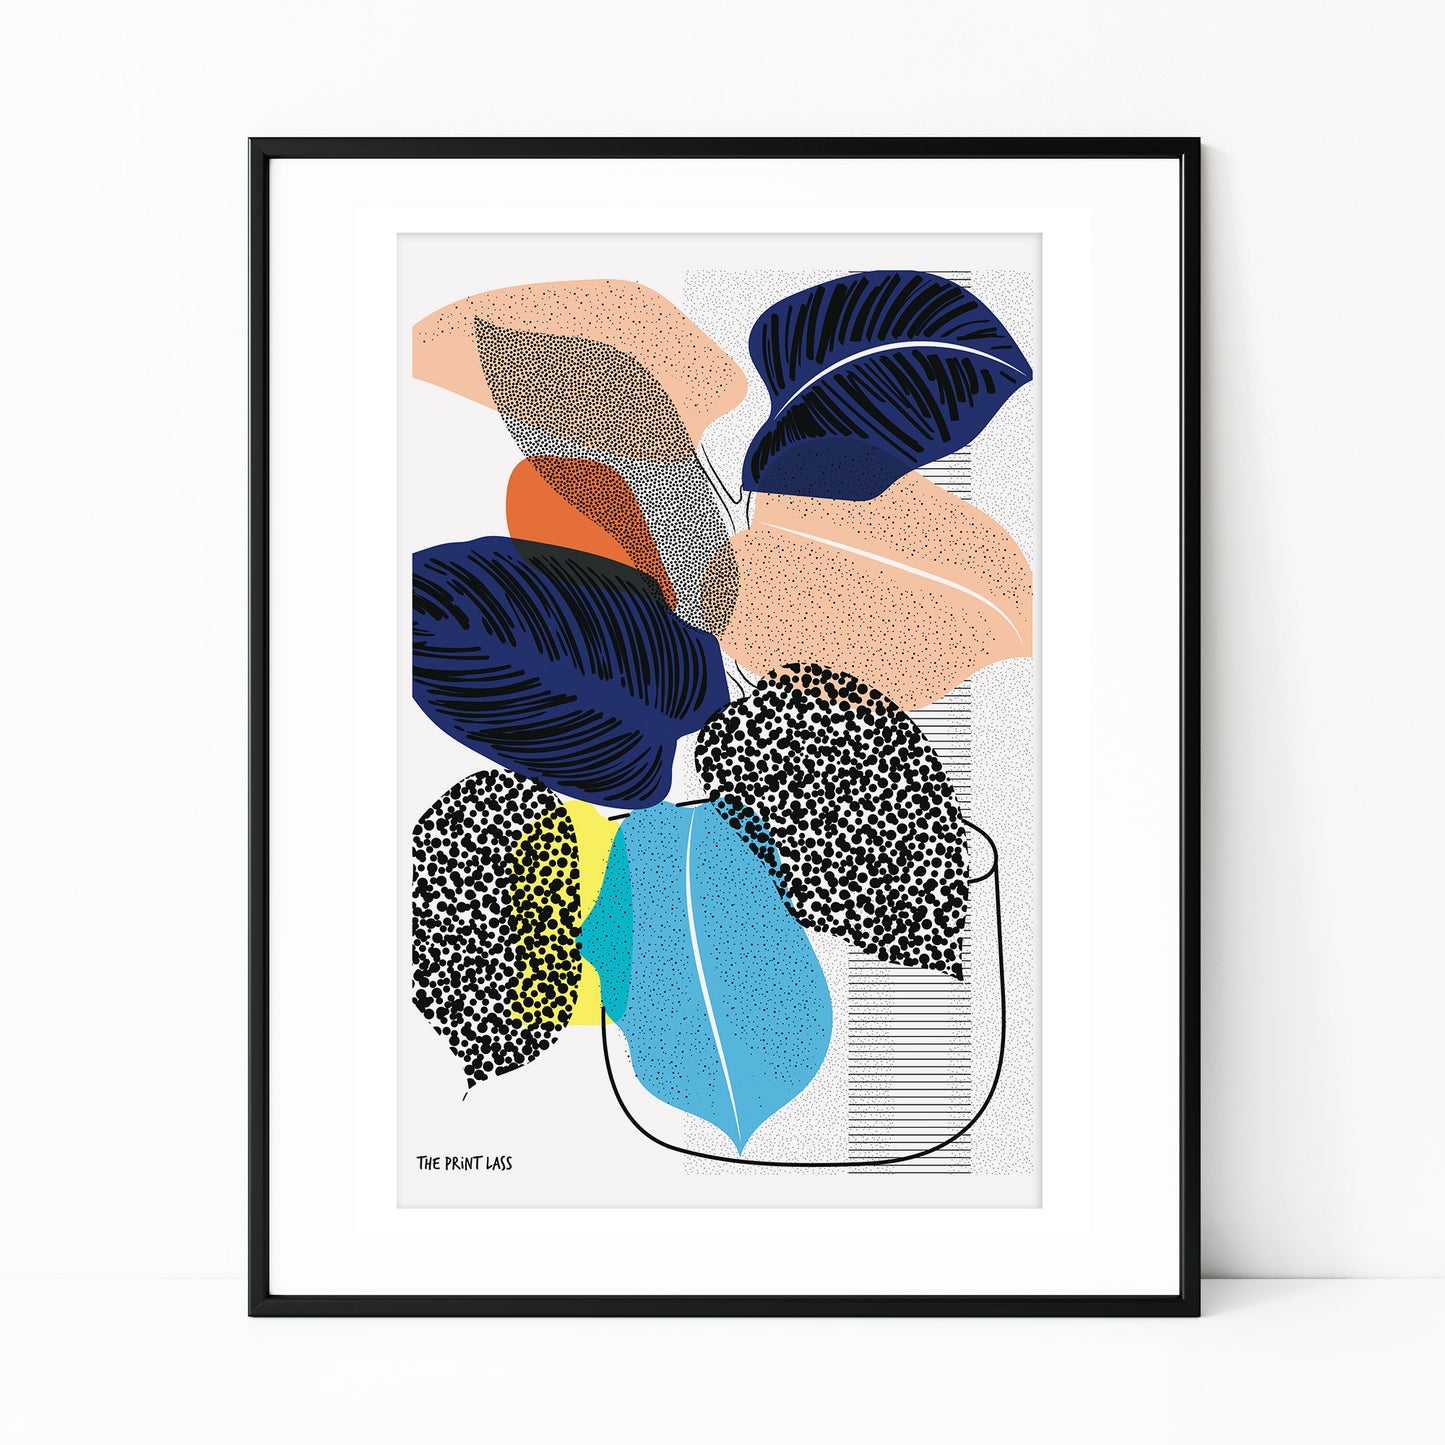 Calathea Plant A4 A5 Art Print by The Print Lass, shown in black frame (not included) on white background